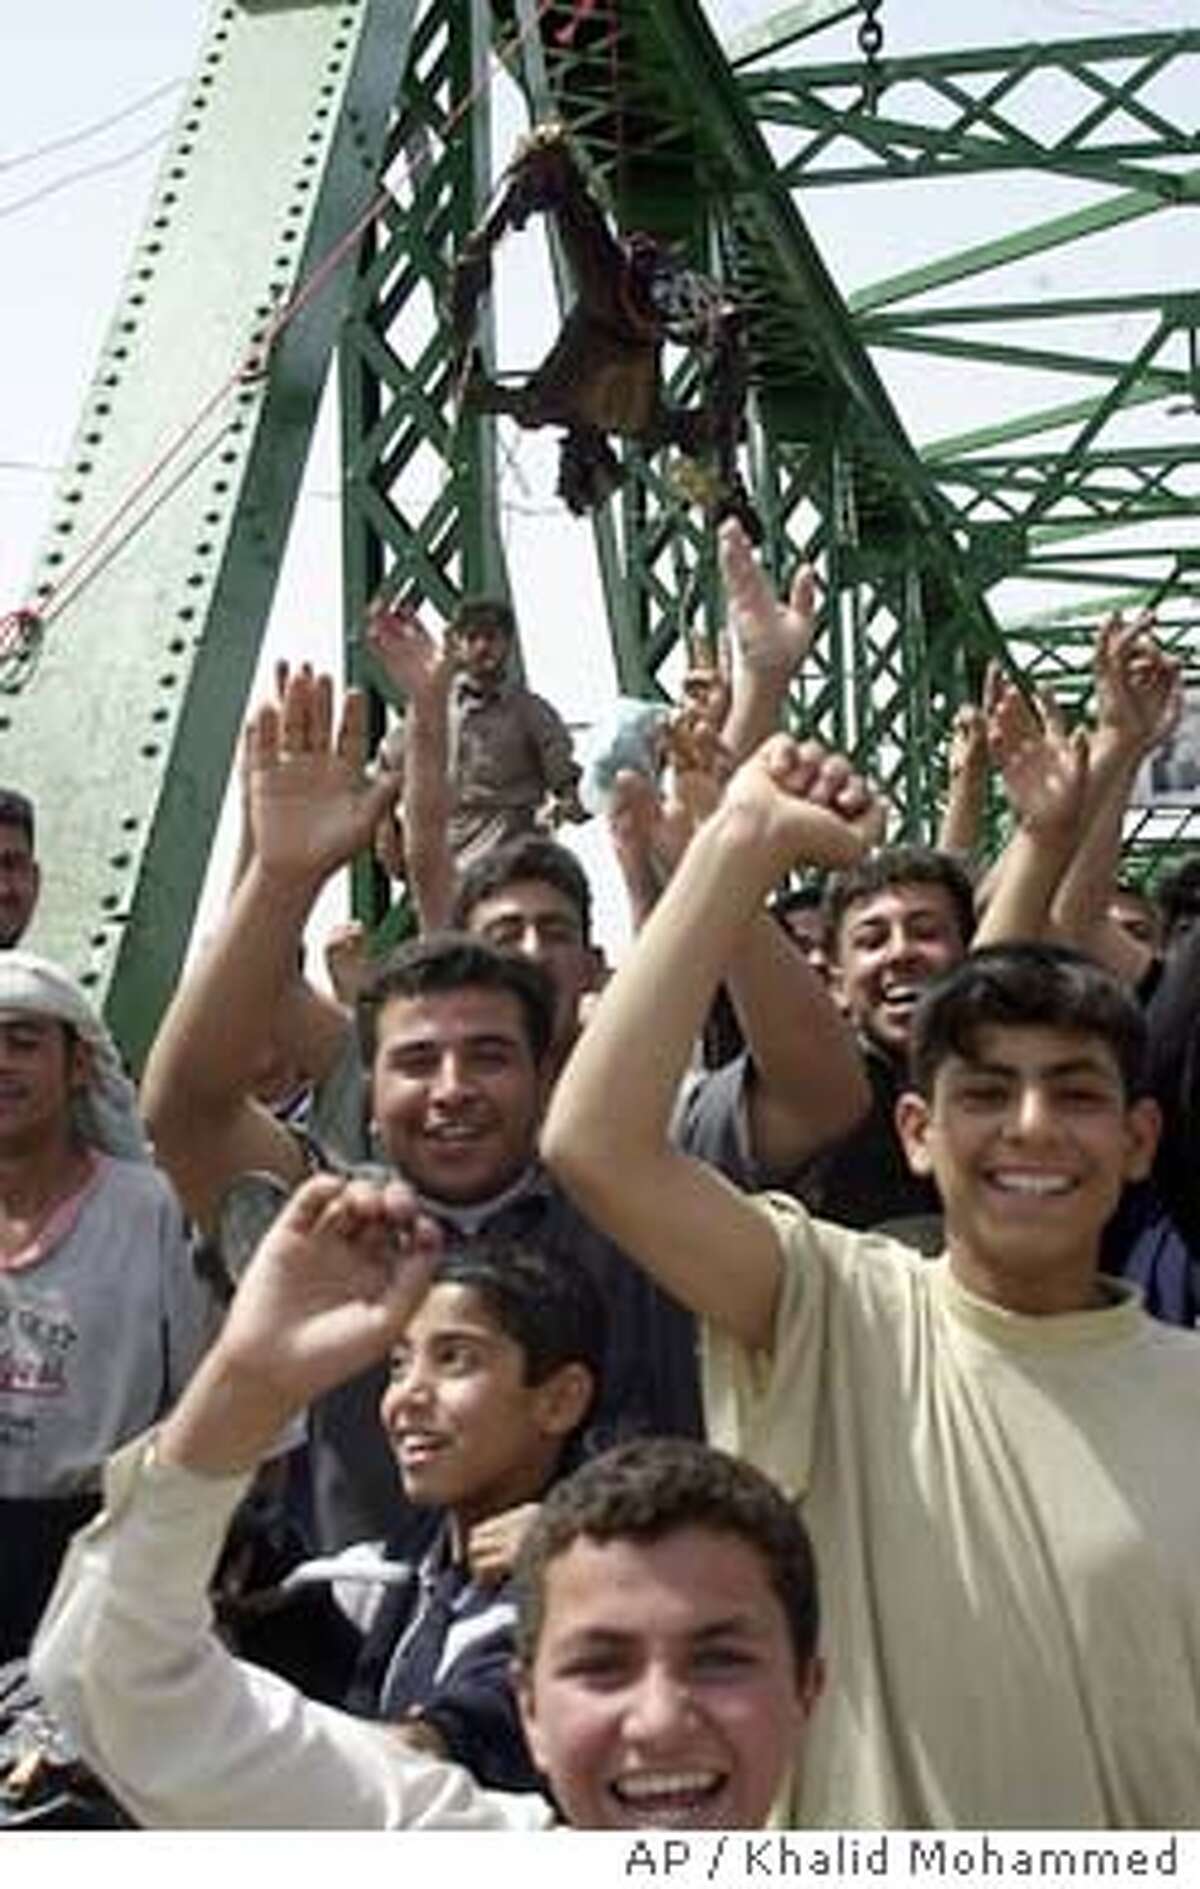 ** EDS NOTE GRAPHIC CONTENT **Iraqis chant anti-American slogans on a bridge over the Euphrates River where charred bodies are hanging in Fallujah, west of Baghdad, Wednesday March 31 2004. Enraged Iraqis in this hotbed of anti-Americanism killed four foreigners Wednesday, including at least one U.S. national, took the charred bodies from a burning SUV, dragged them through the streets, and hung them from the bridge spanning the Euphrates River. (AP Photo/Khalid Mohammed)